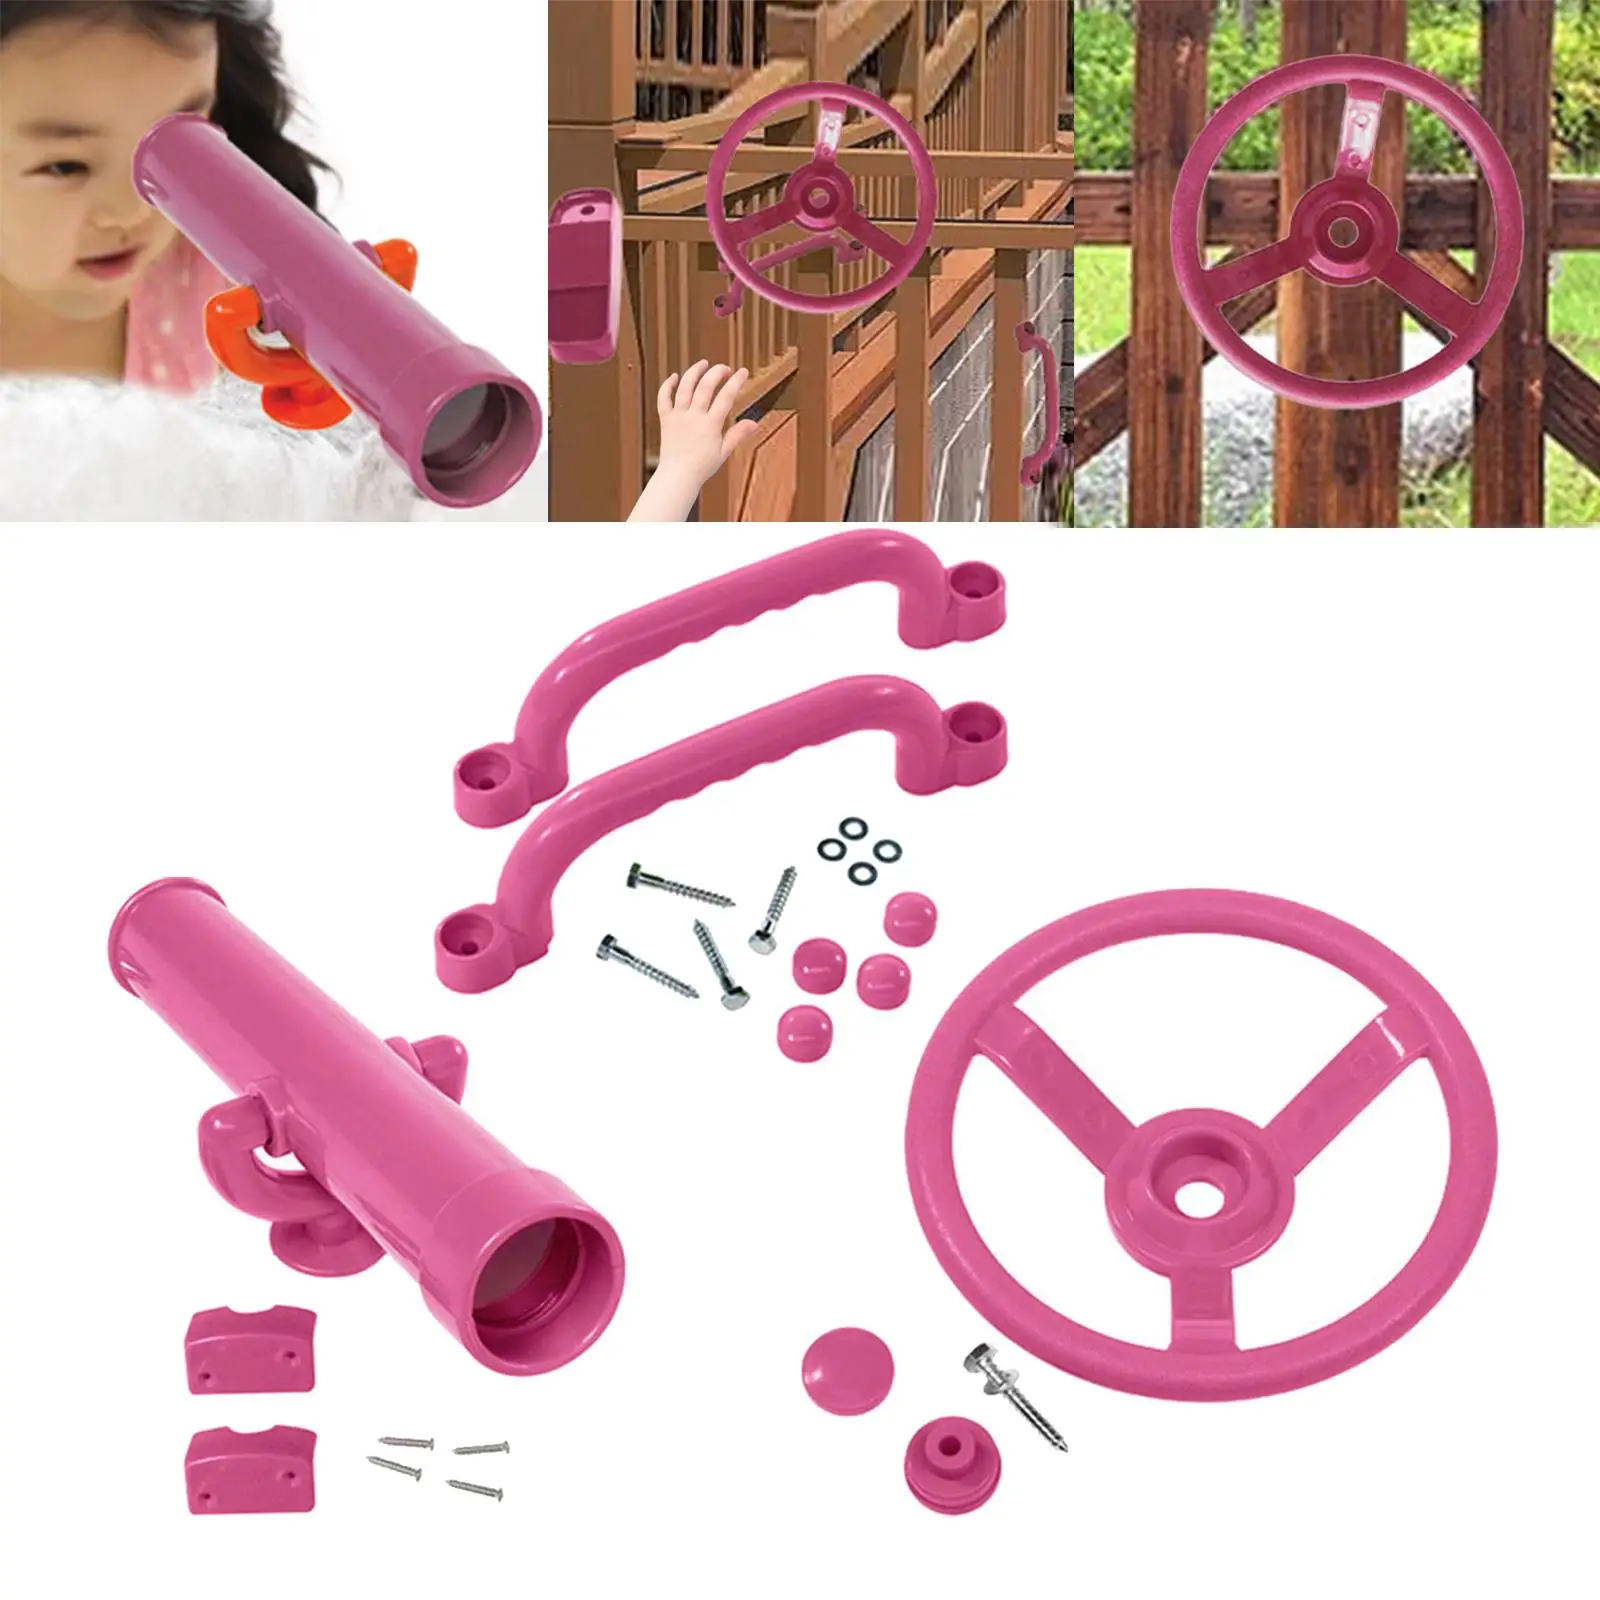 Playground Accessories Easy to Install Swingset Attachments for Playhouse Jungle Gym Climbing Frame Tree House Attachments